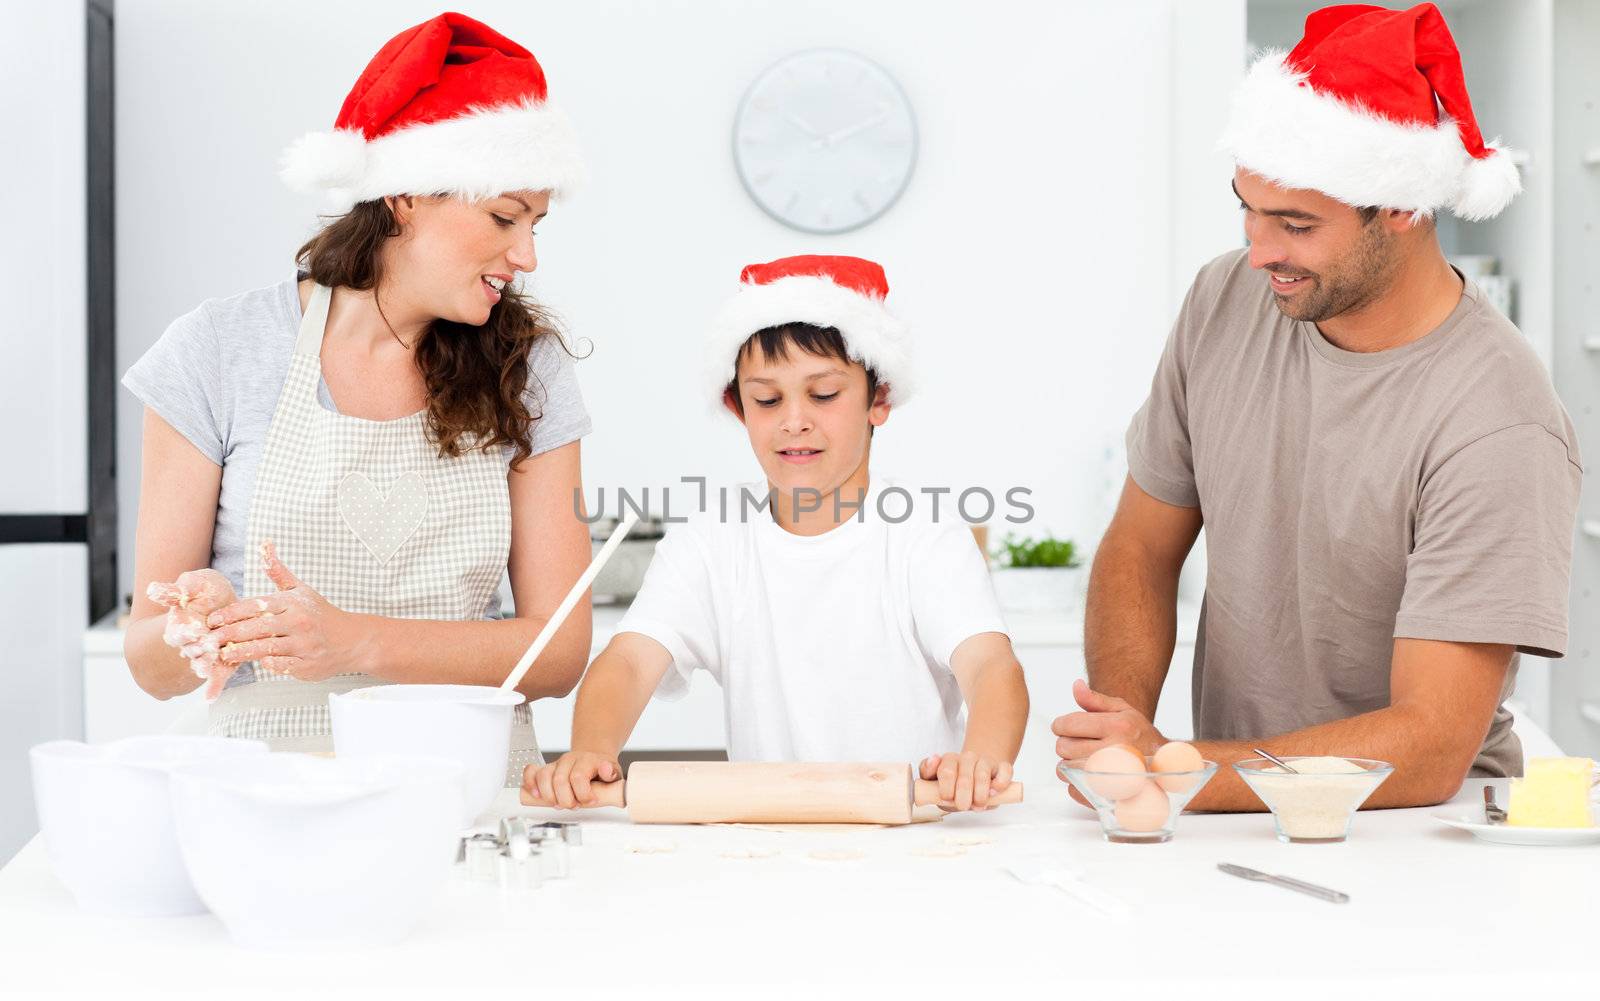 Proud parents looking at their son using a rolling pin by Wavebreakmedia